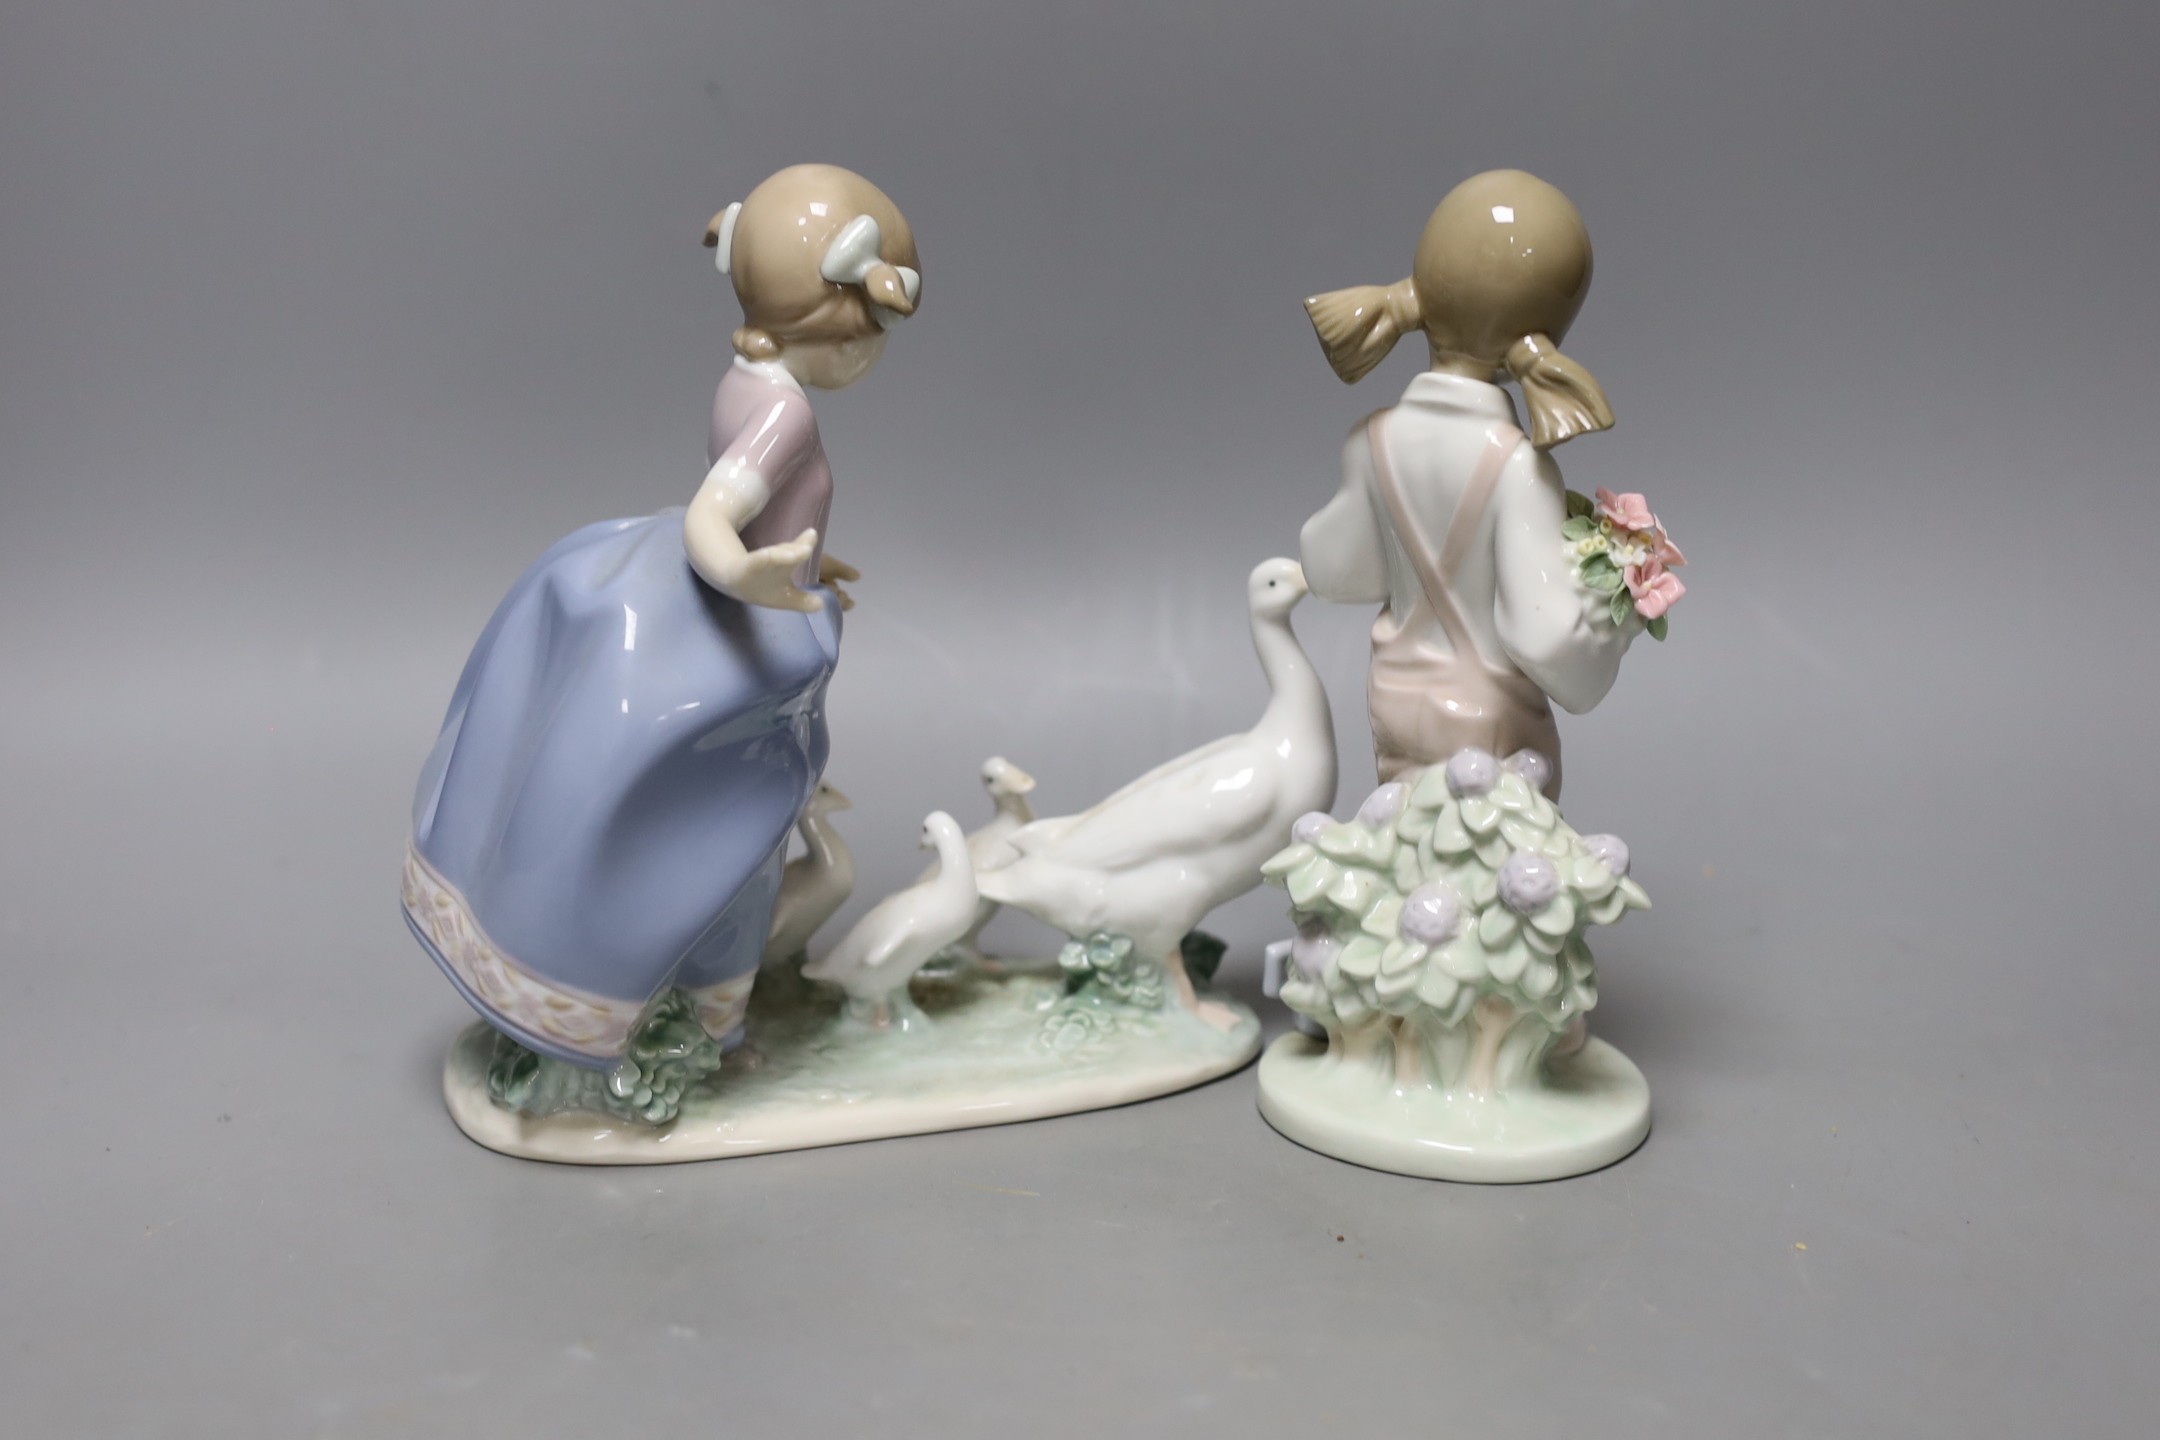 A boxed Lladro figure and another